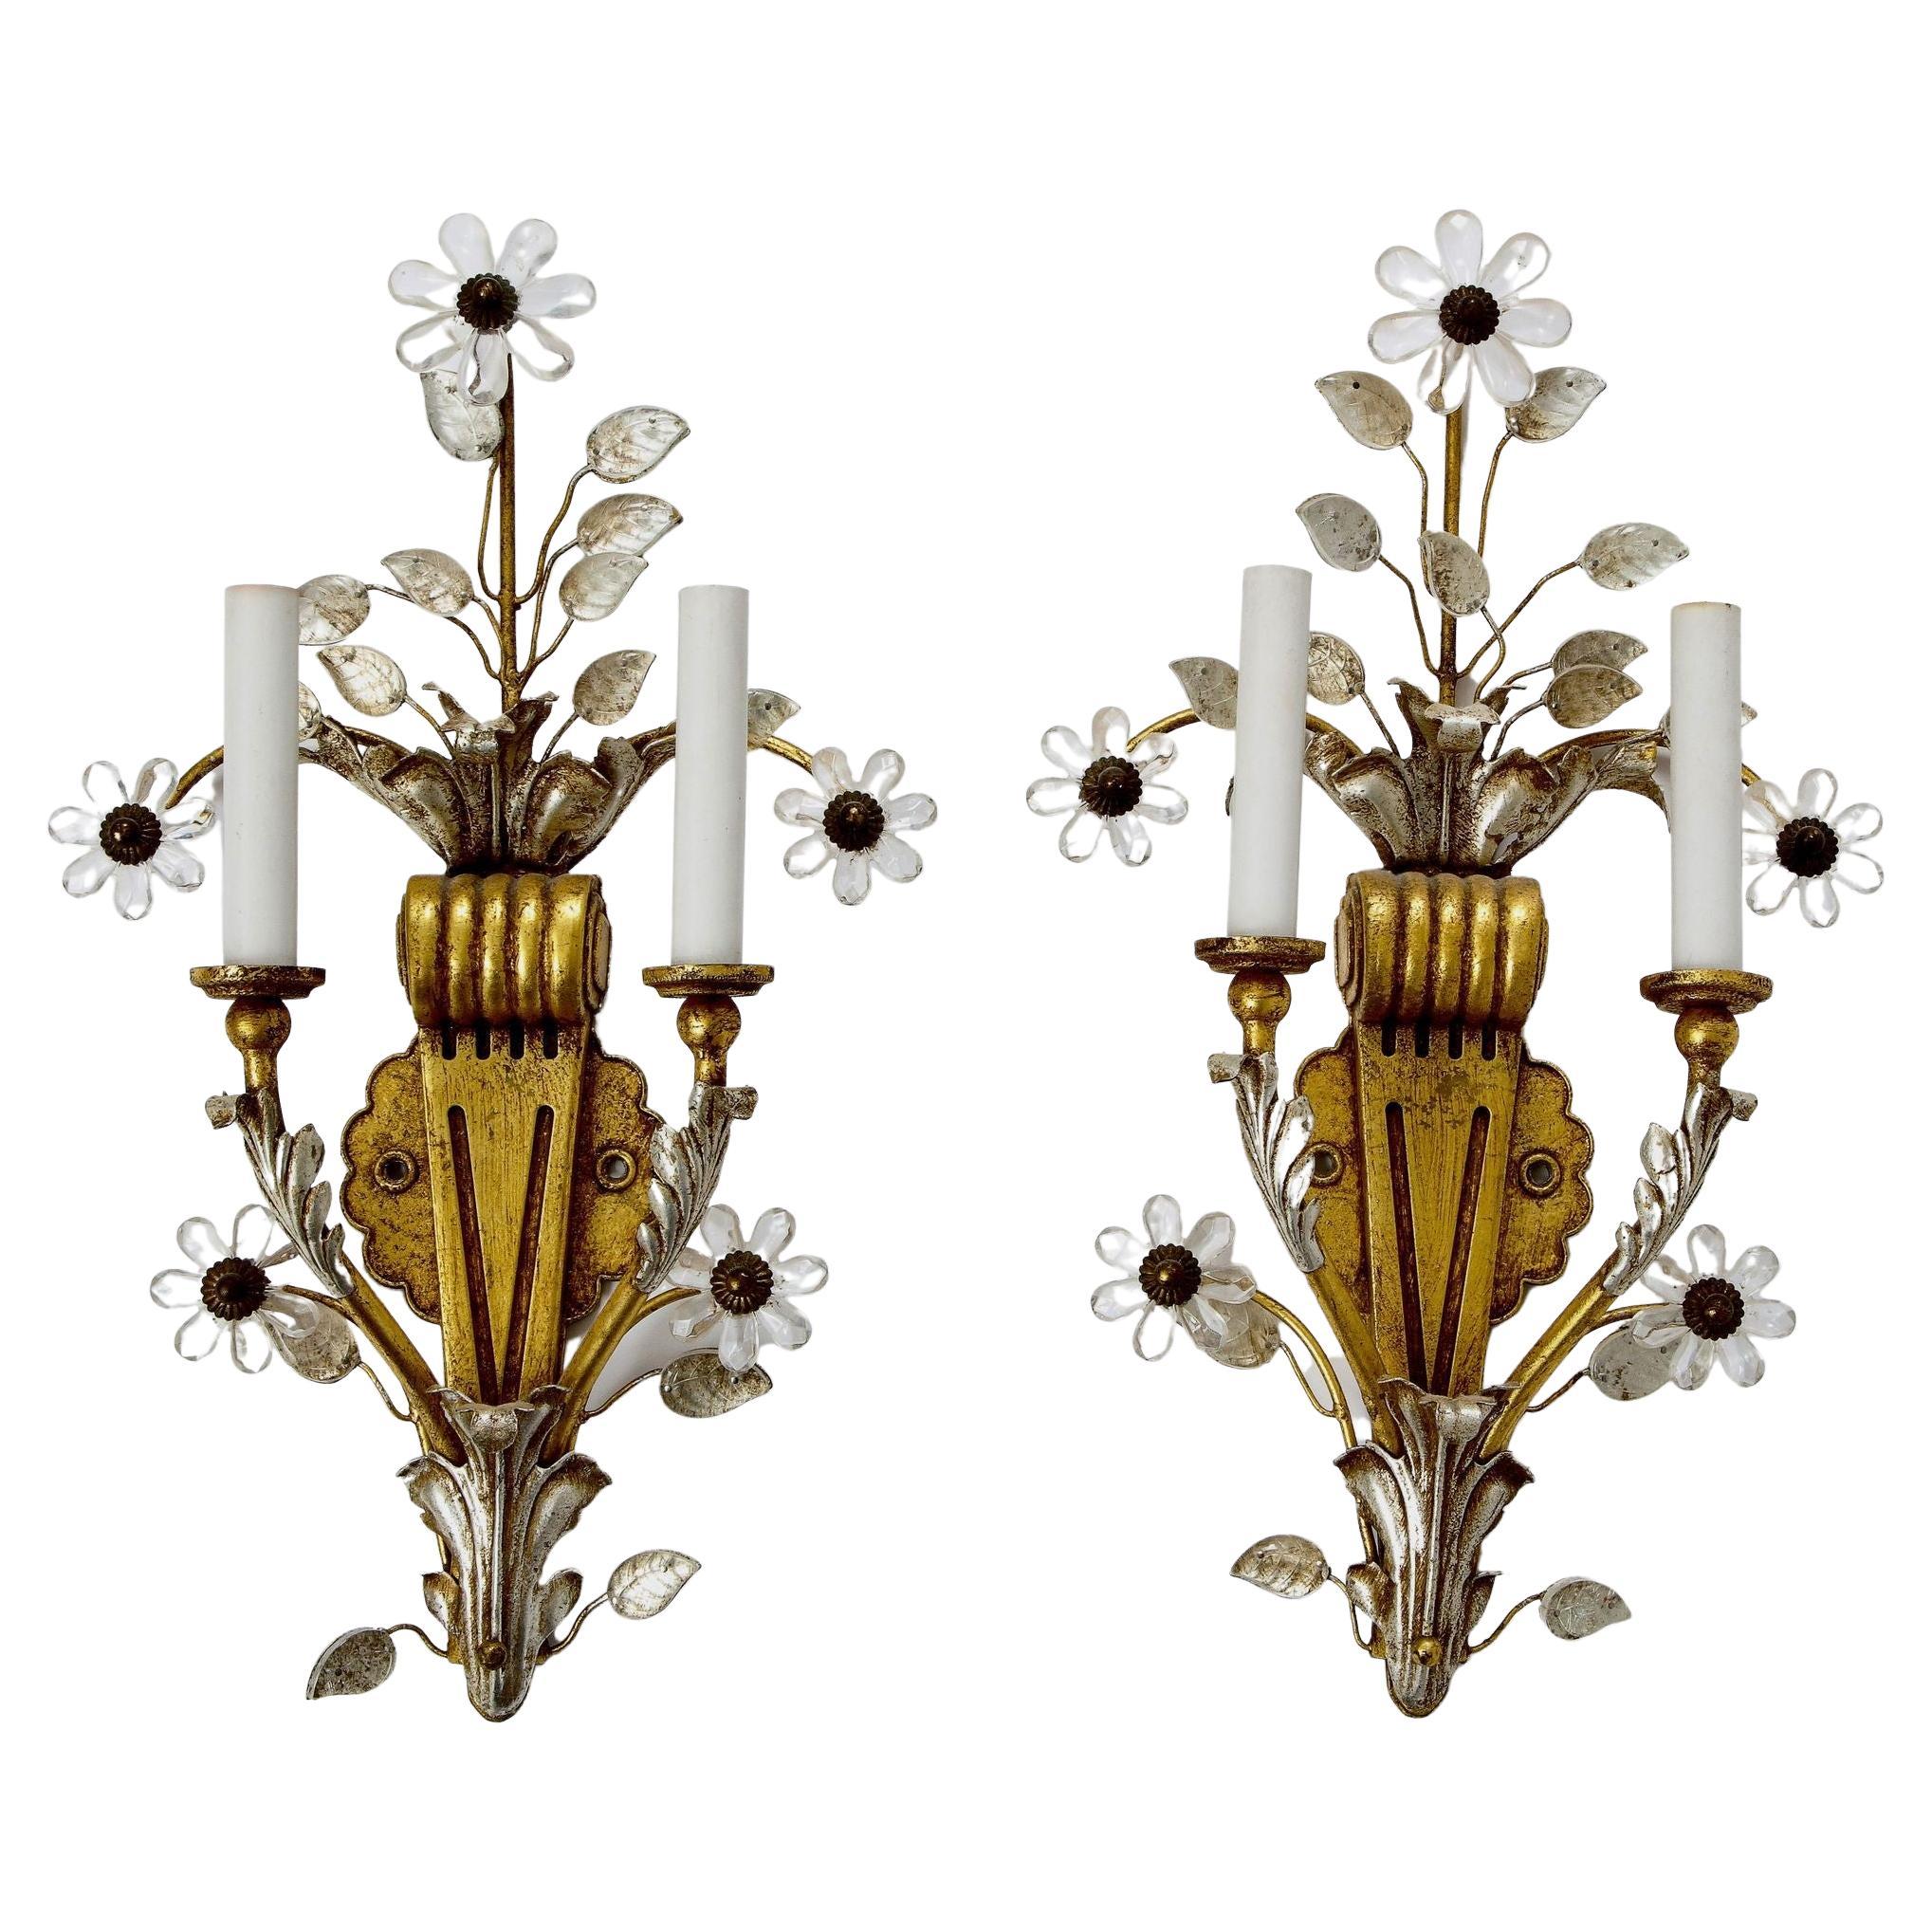 Pair of Gilt and Silvered Rock Crystal Floral Motif Sconces By Banci For Sale